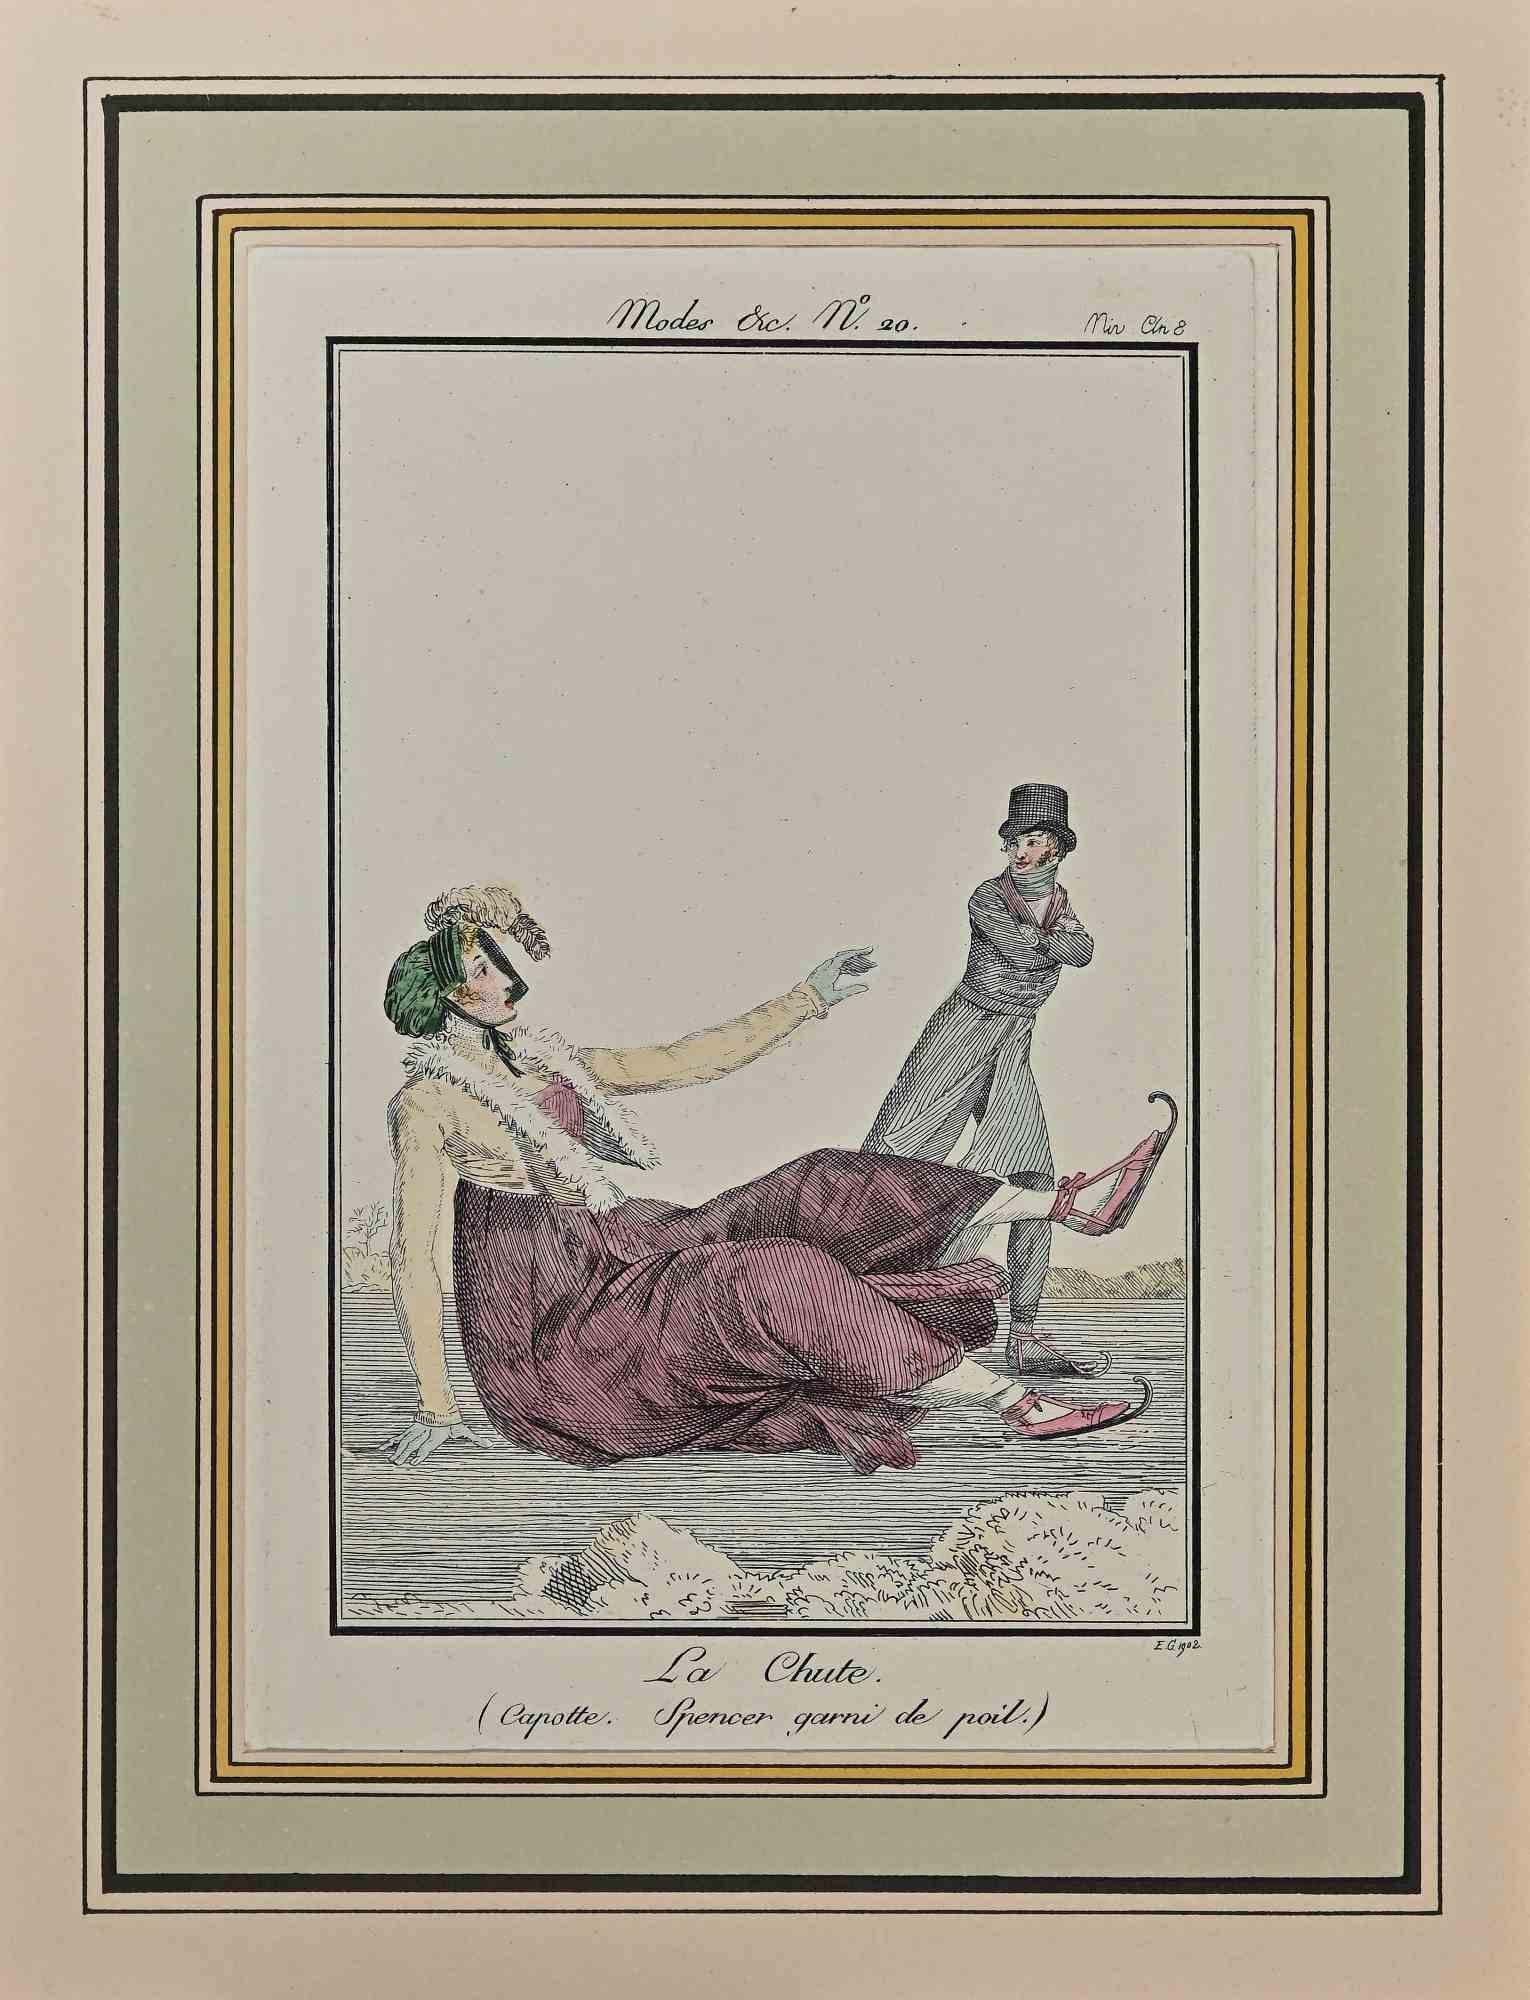 La Chute is an Original Etching Hand Watercolored series "Costumes Parisiens" published in 1797 by the Journald des Dames et des Modes".

Costume Parisien - Model n. 20 is an original watercolored print realized in 1797. 

The artwork is the plate